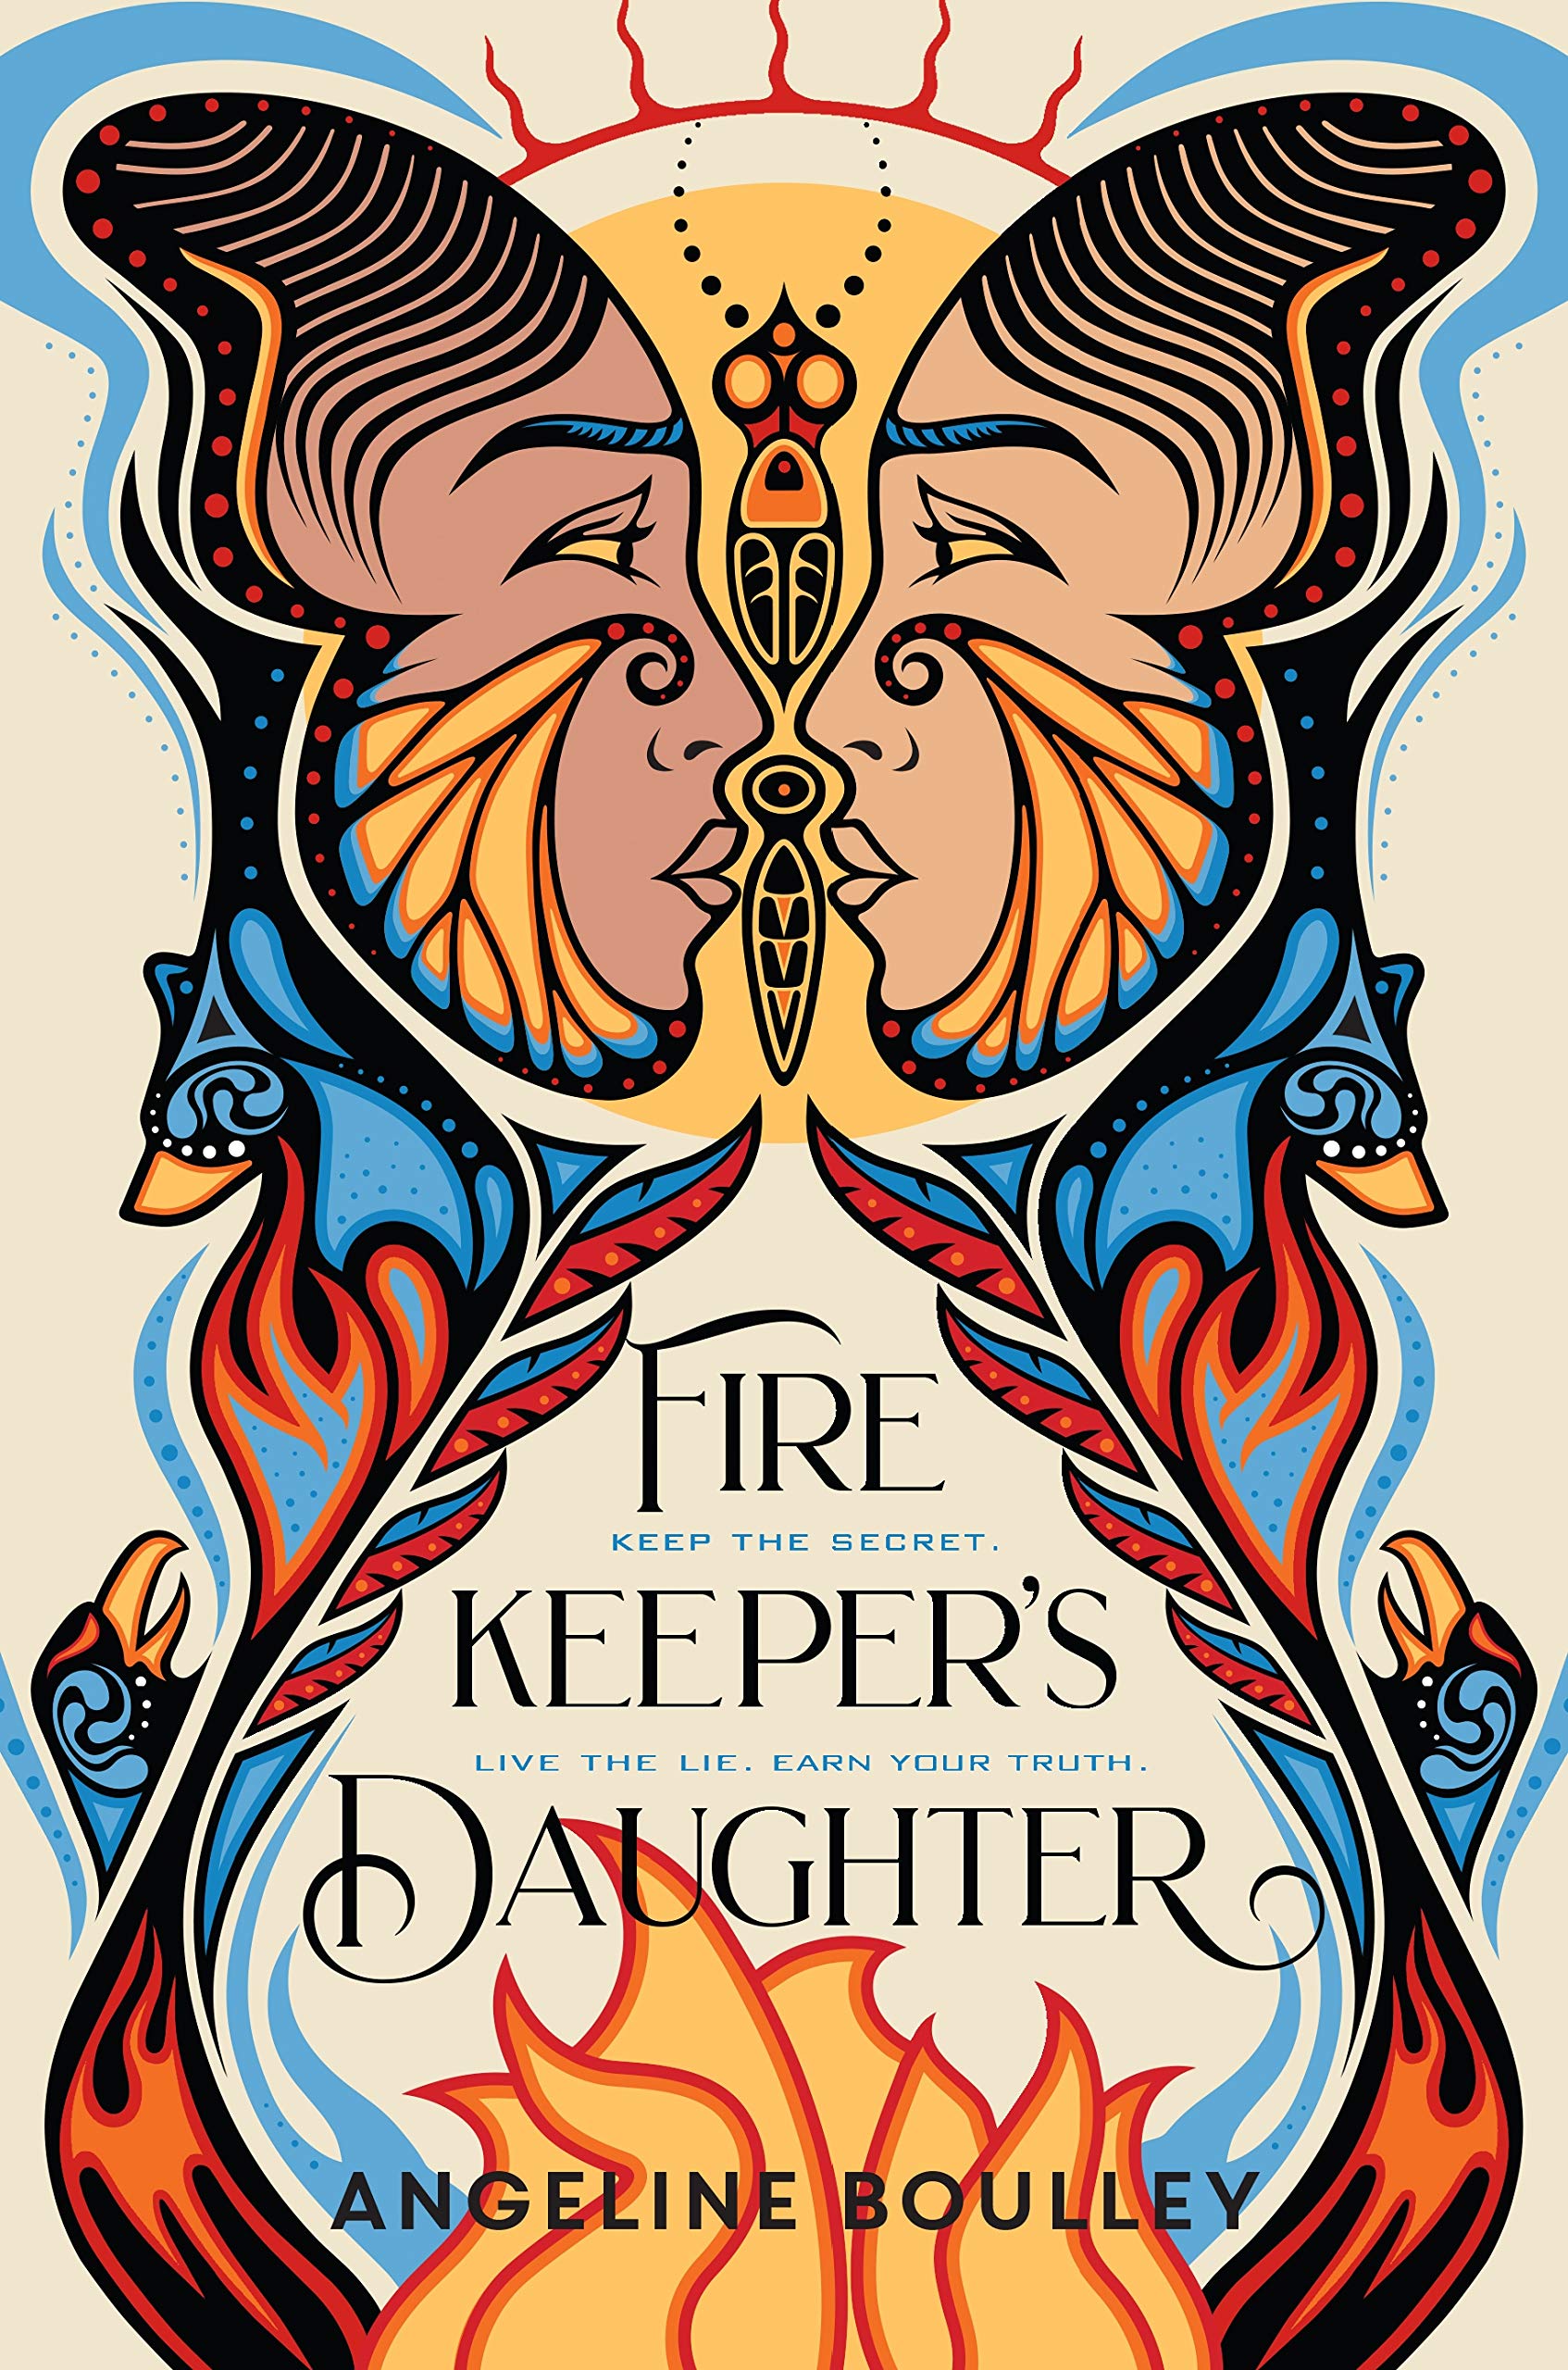 Fire Keepers daughter book cover